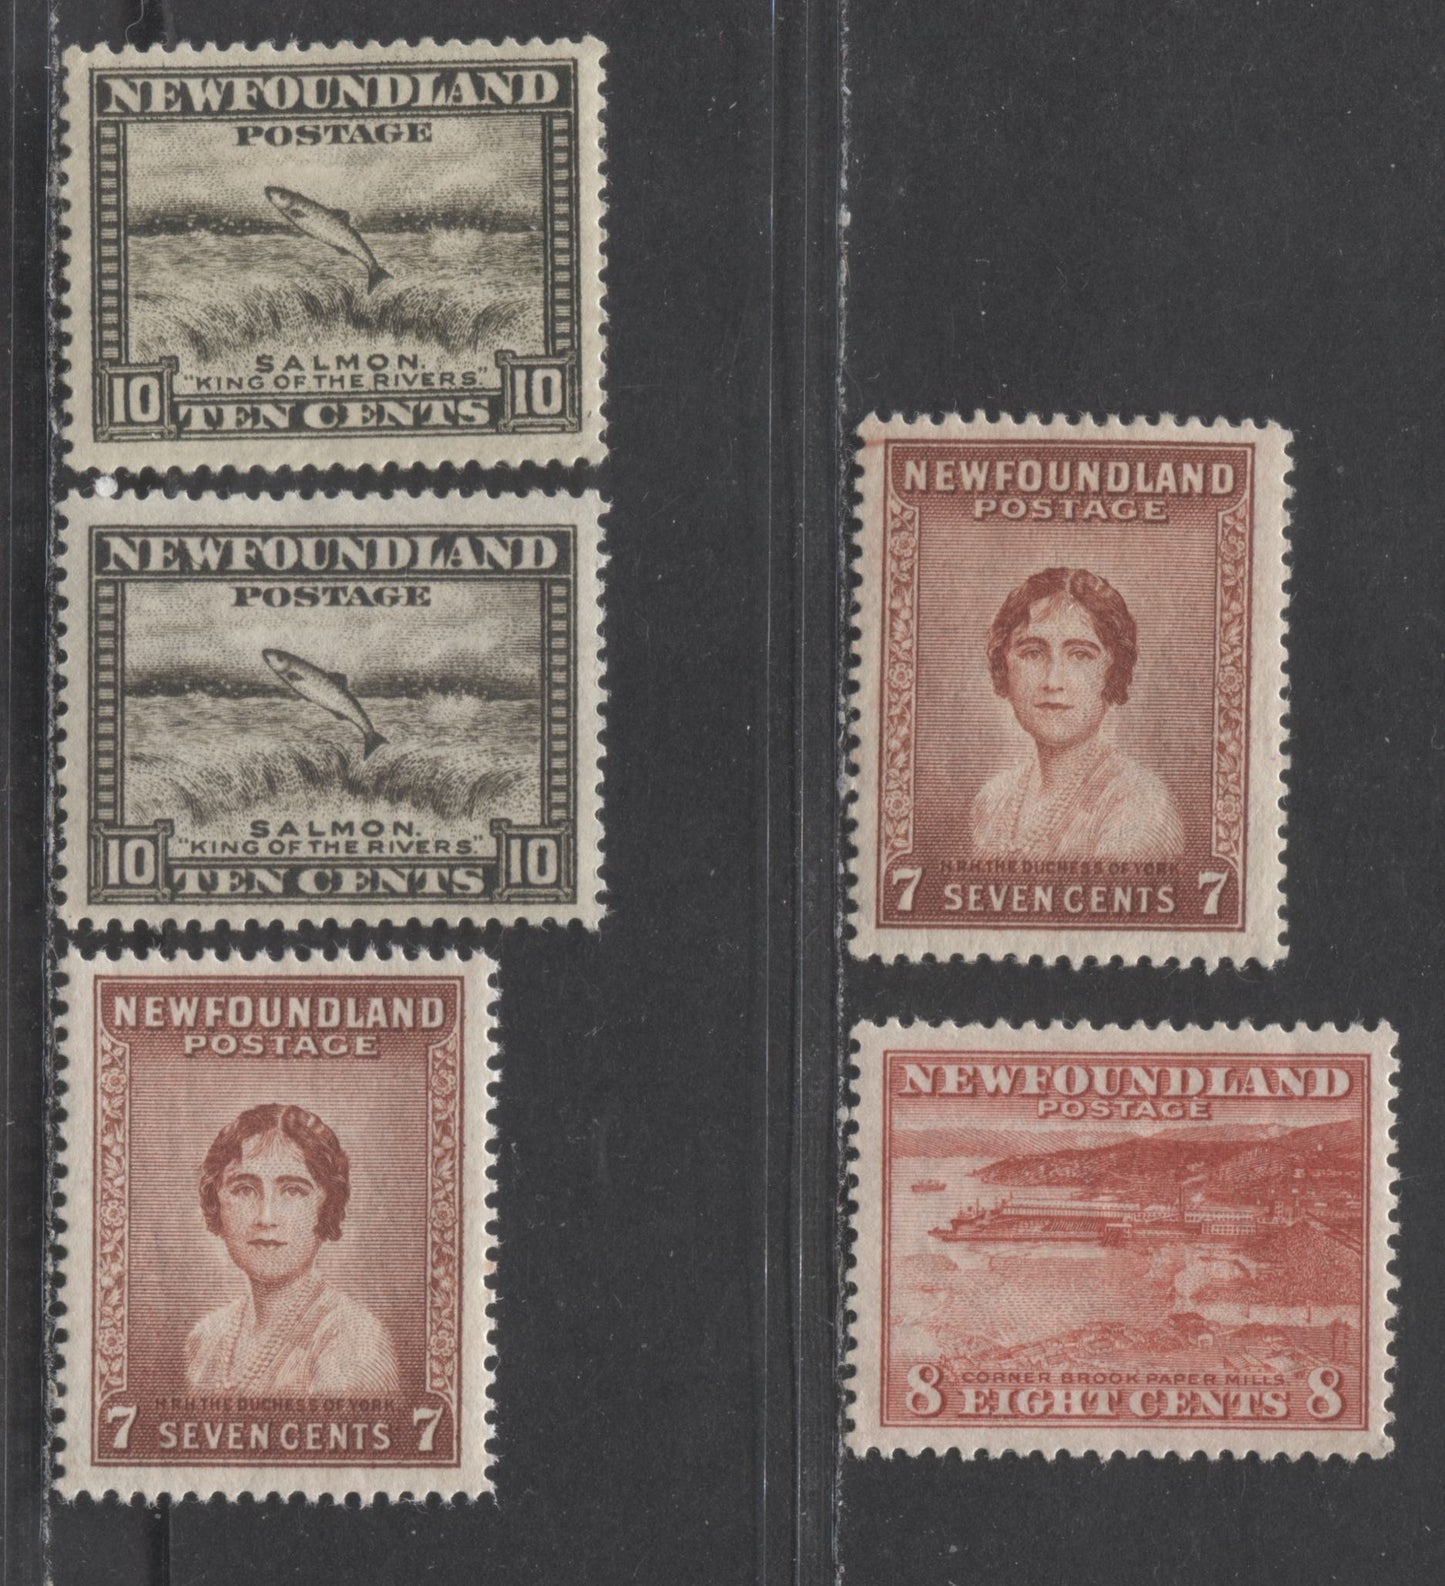 Lot 84 Newfoundland #193, 208-209 10c, 7c & 8c Olive Black, Red Brown & Orange Red Salmon Leaping, Duchess York & Corner Brook Paper Mill, 1932-1937 Perkins Bacon Definitives, 5 VFNH/OG Singles With Additional Shades Of 10c & 7c